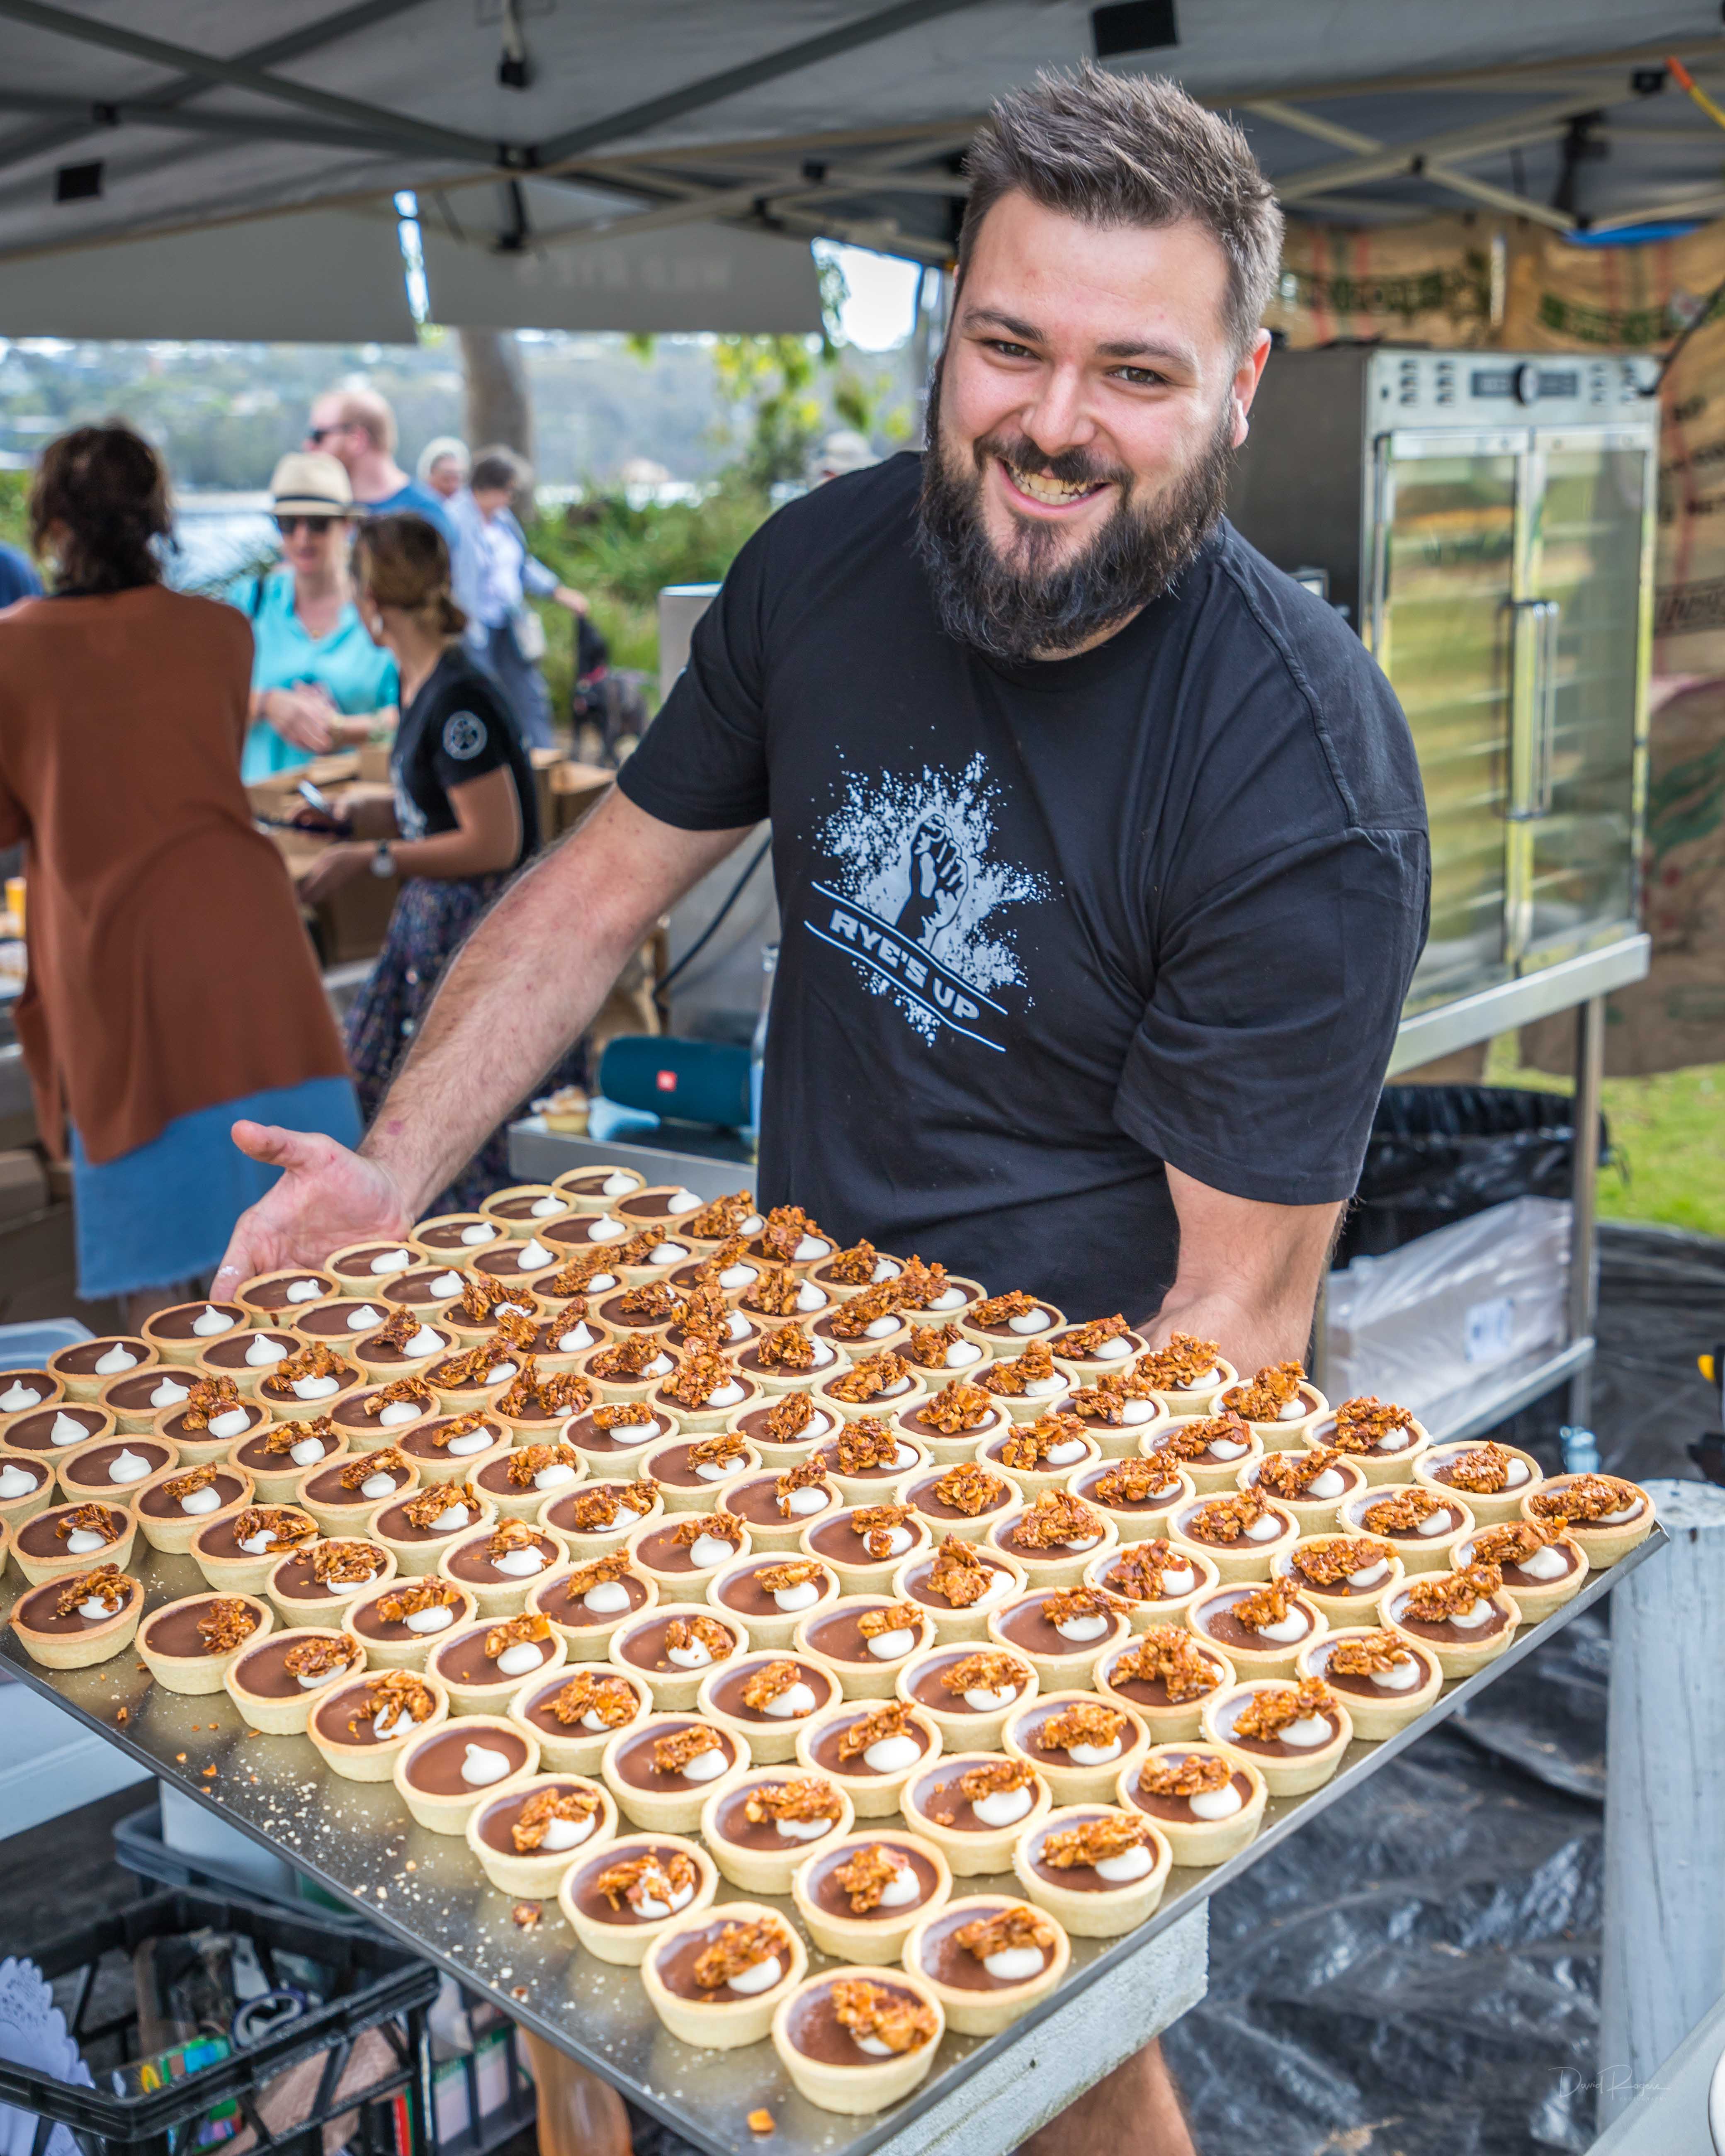 EAT Festival returns bigger and better as a 'true foodie event' on the Sapphire Coast